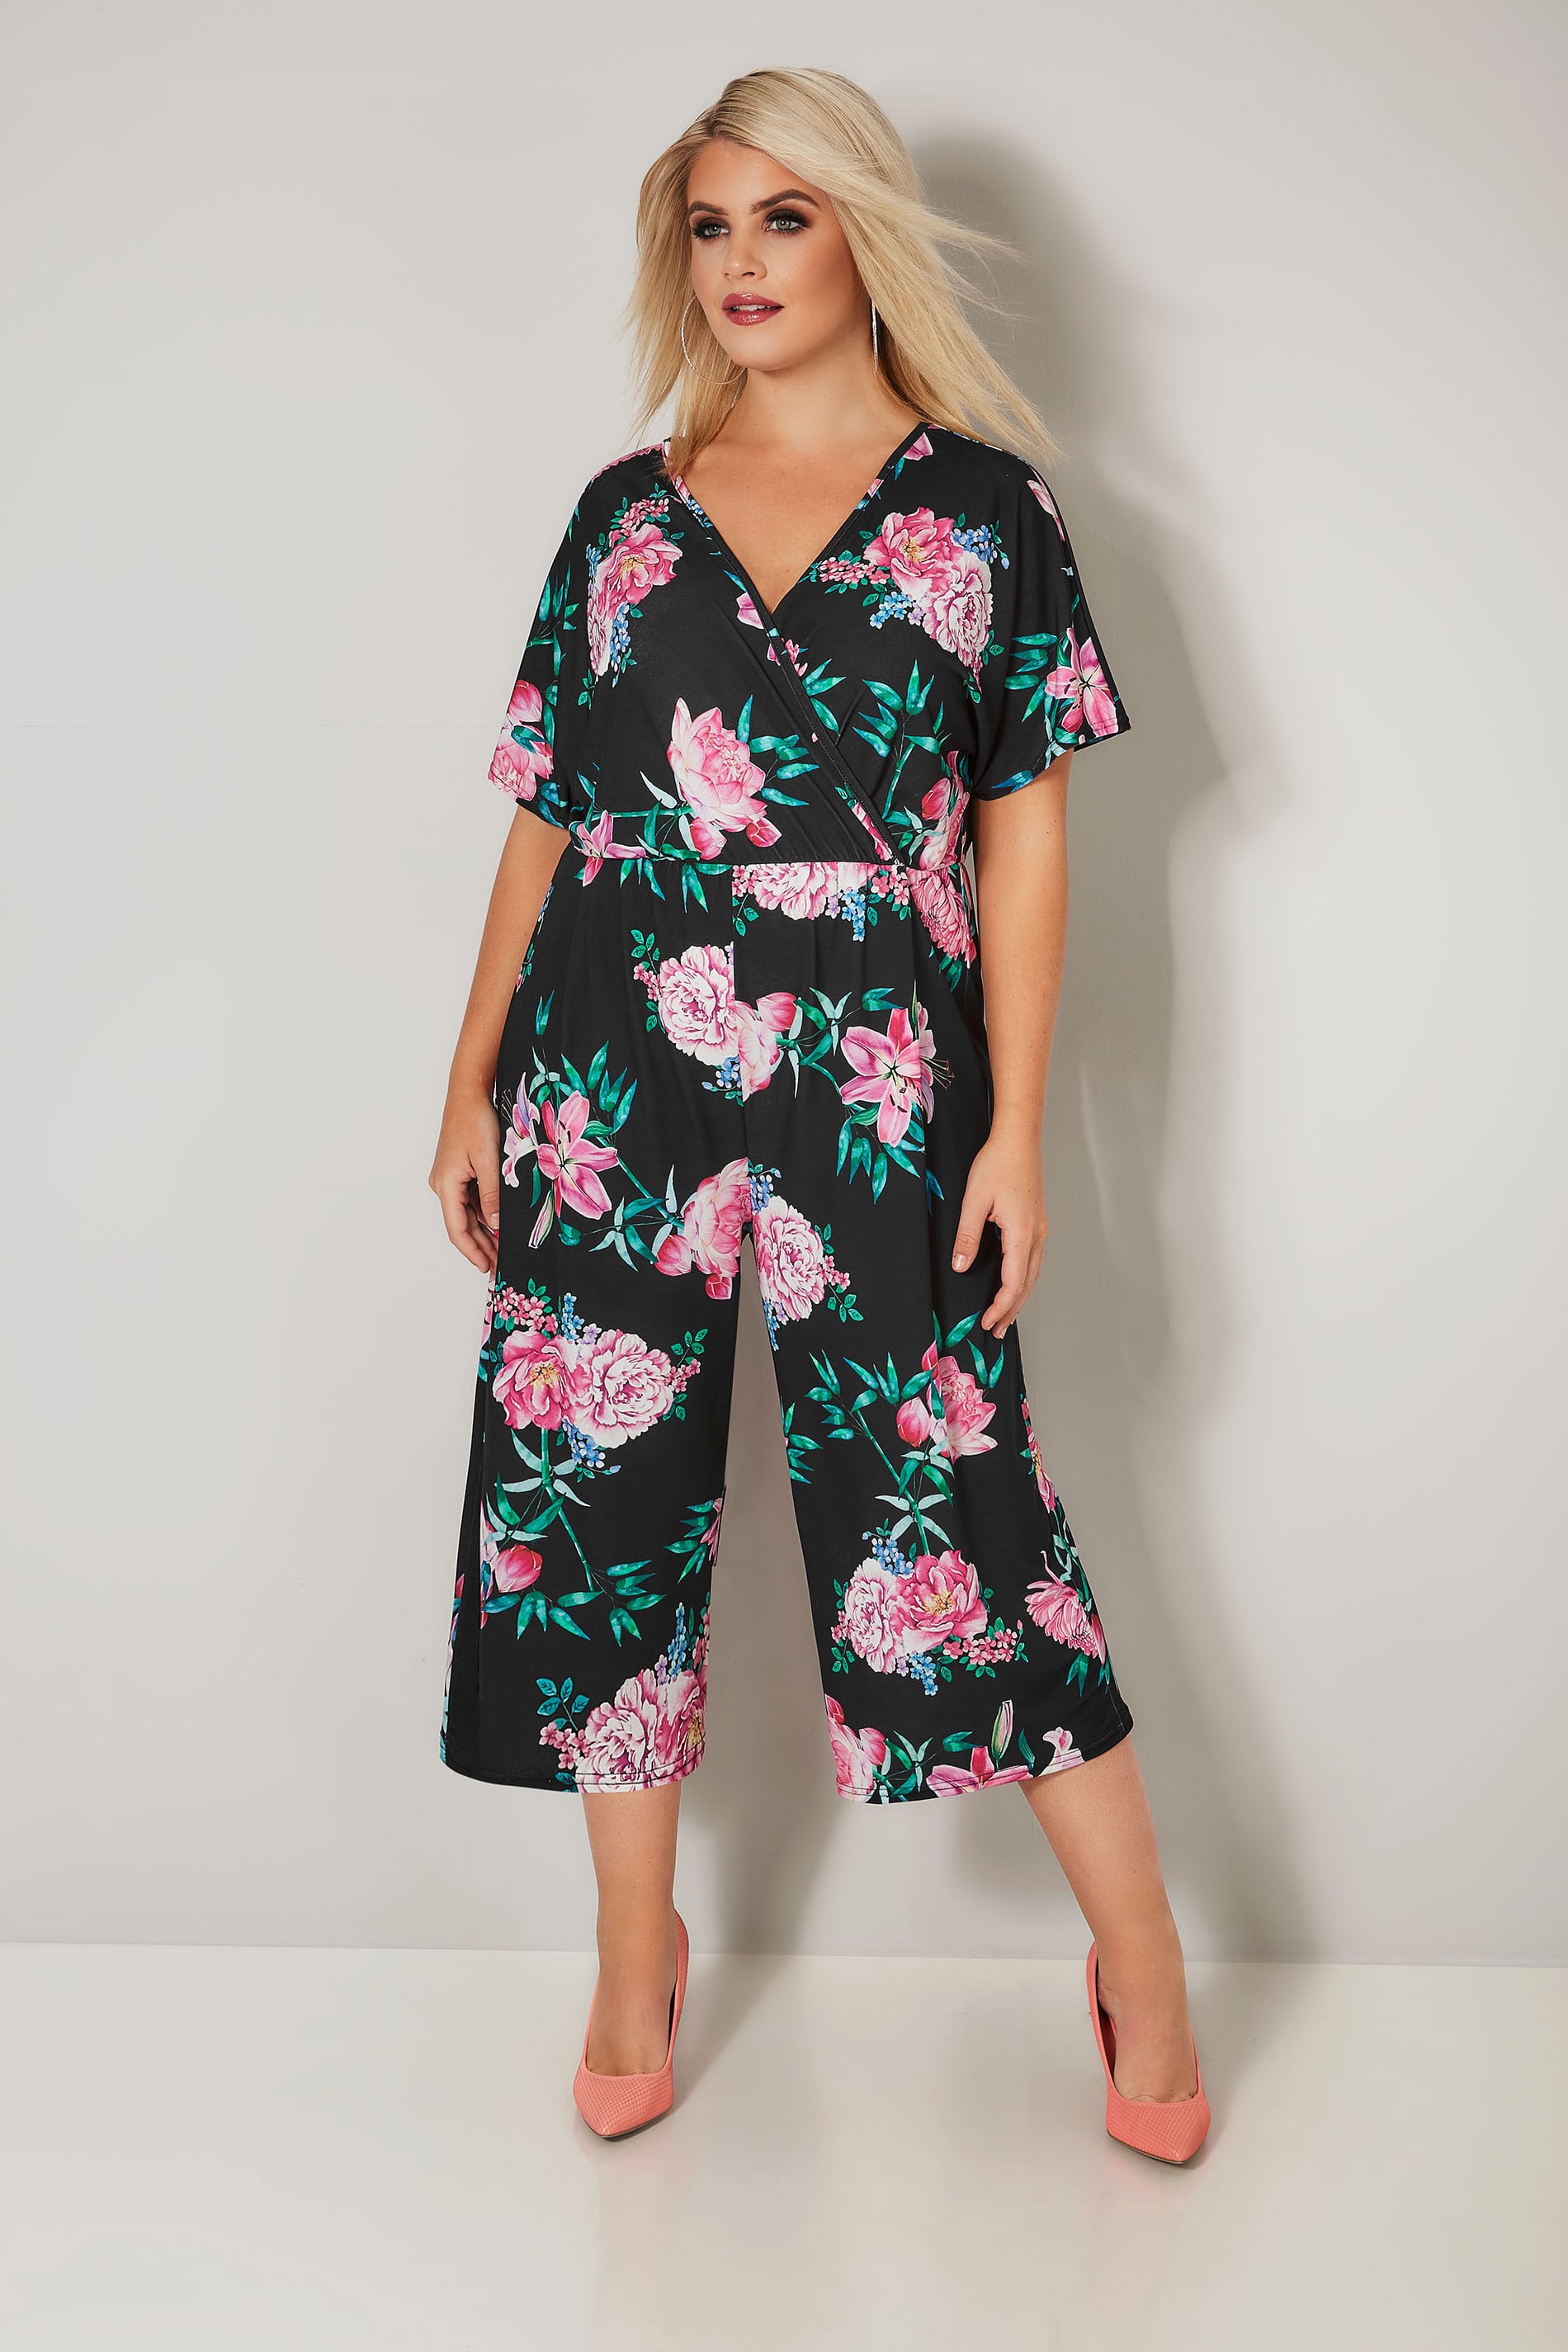 LIMITED COLLECTION Black & Pink Floral Jumpsuit, plus size 16 to 32